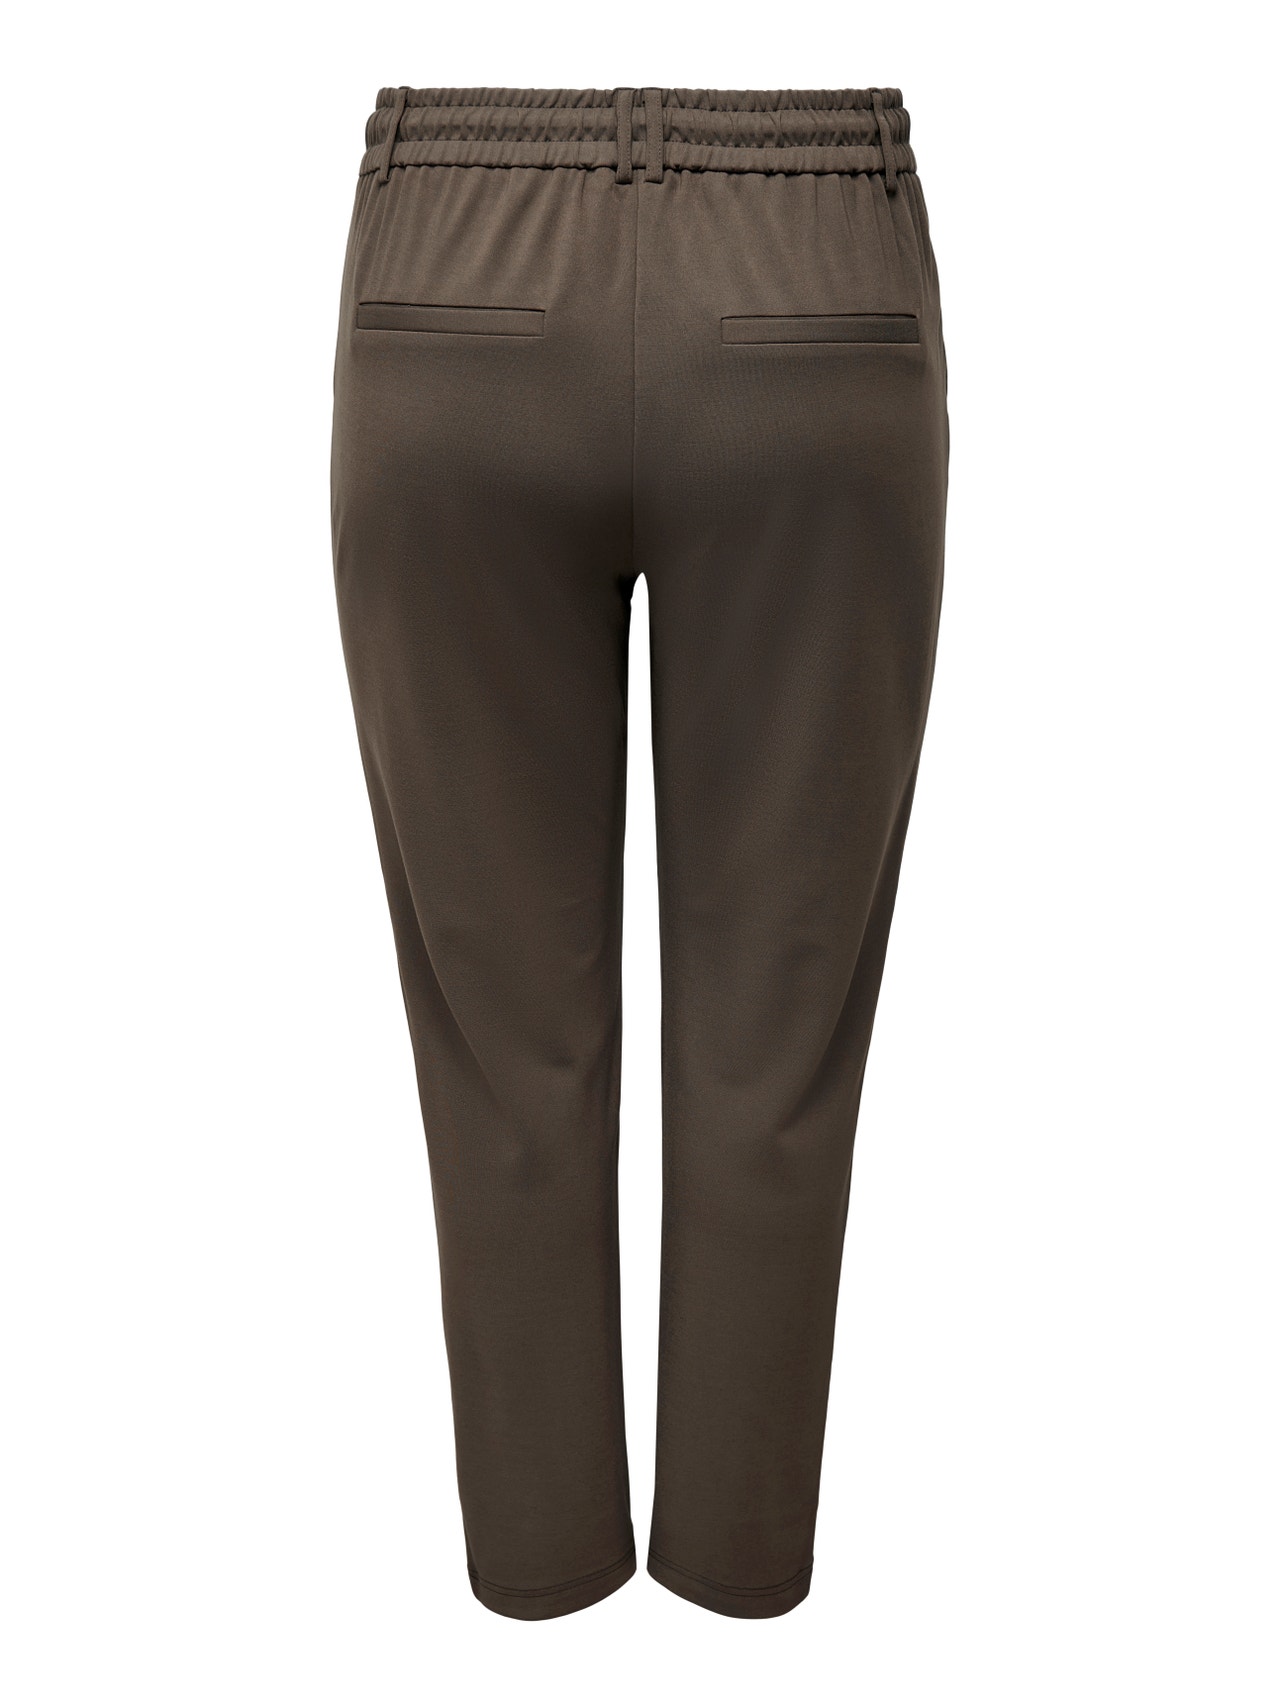 ONLY Regular Fit Trousers -Chocolate Martini - 15287532